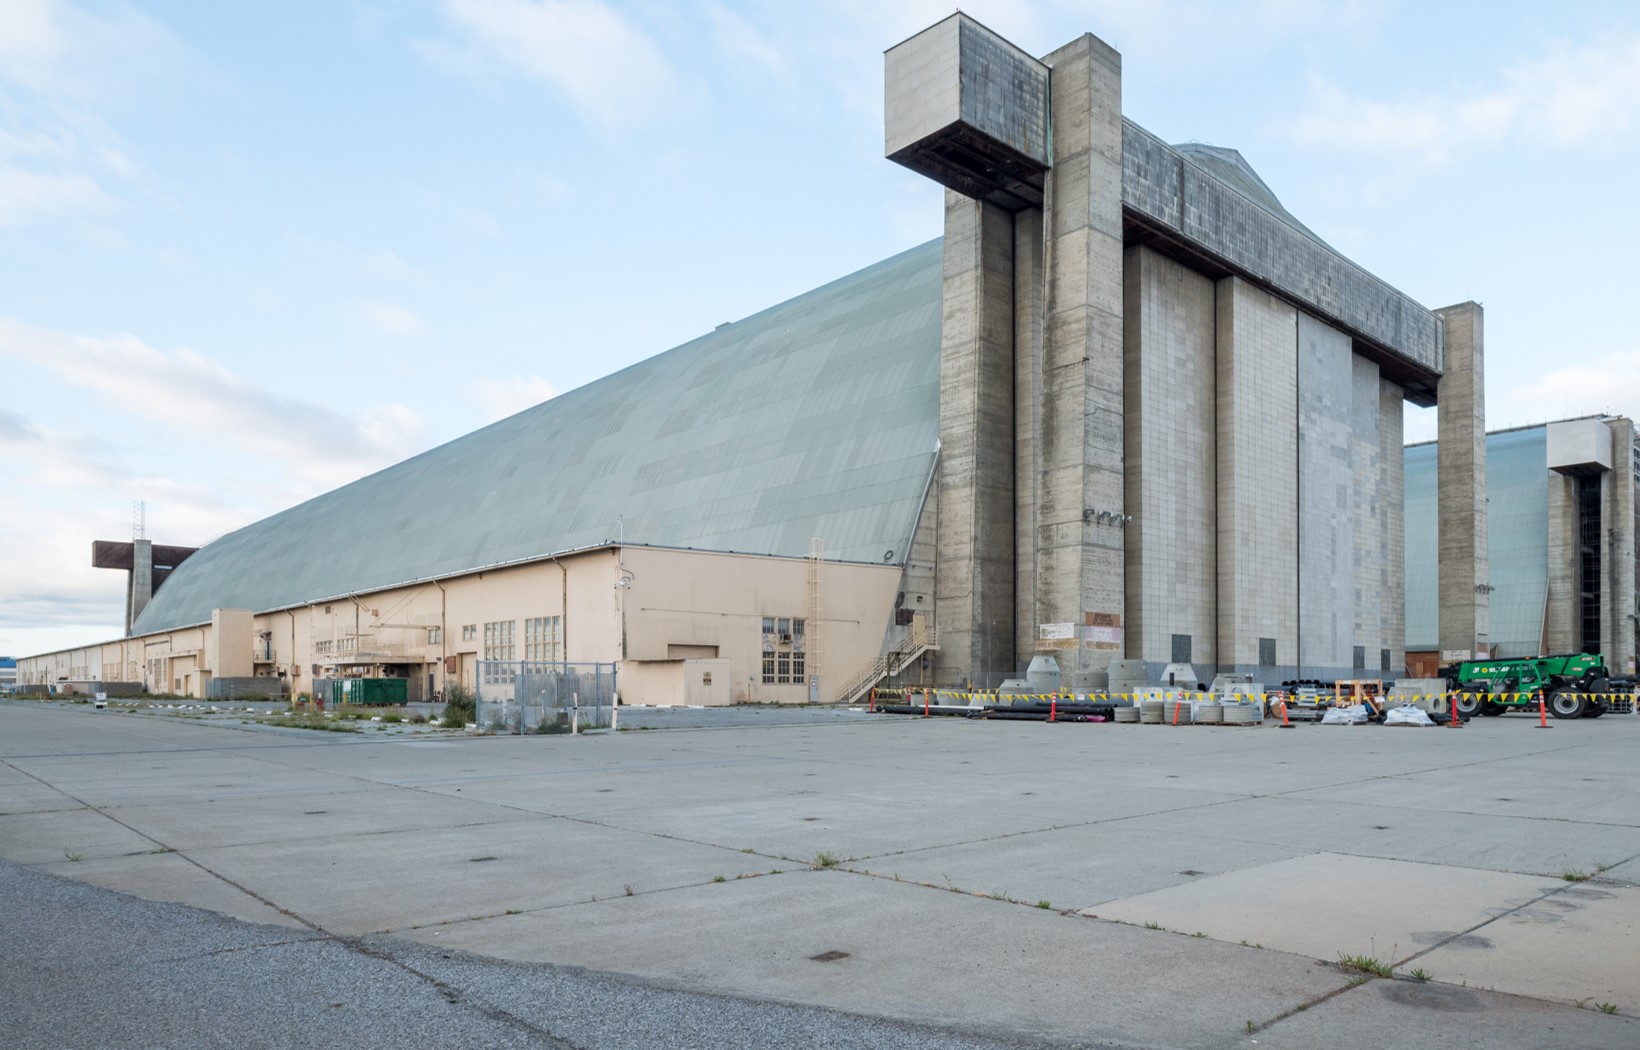 A wide view of the exterior corner of Hangar 3 with its doors closed and the two-story annex building along its long façade.